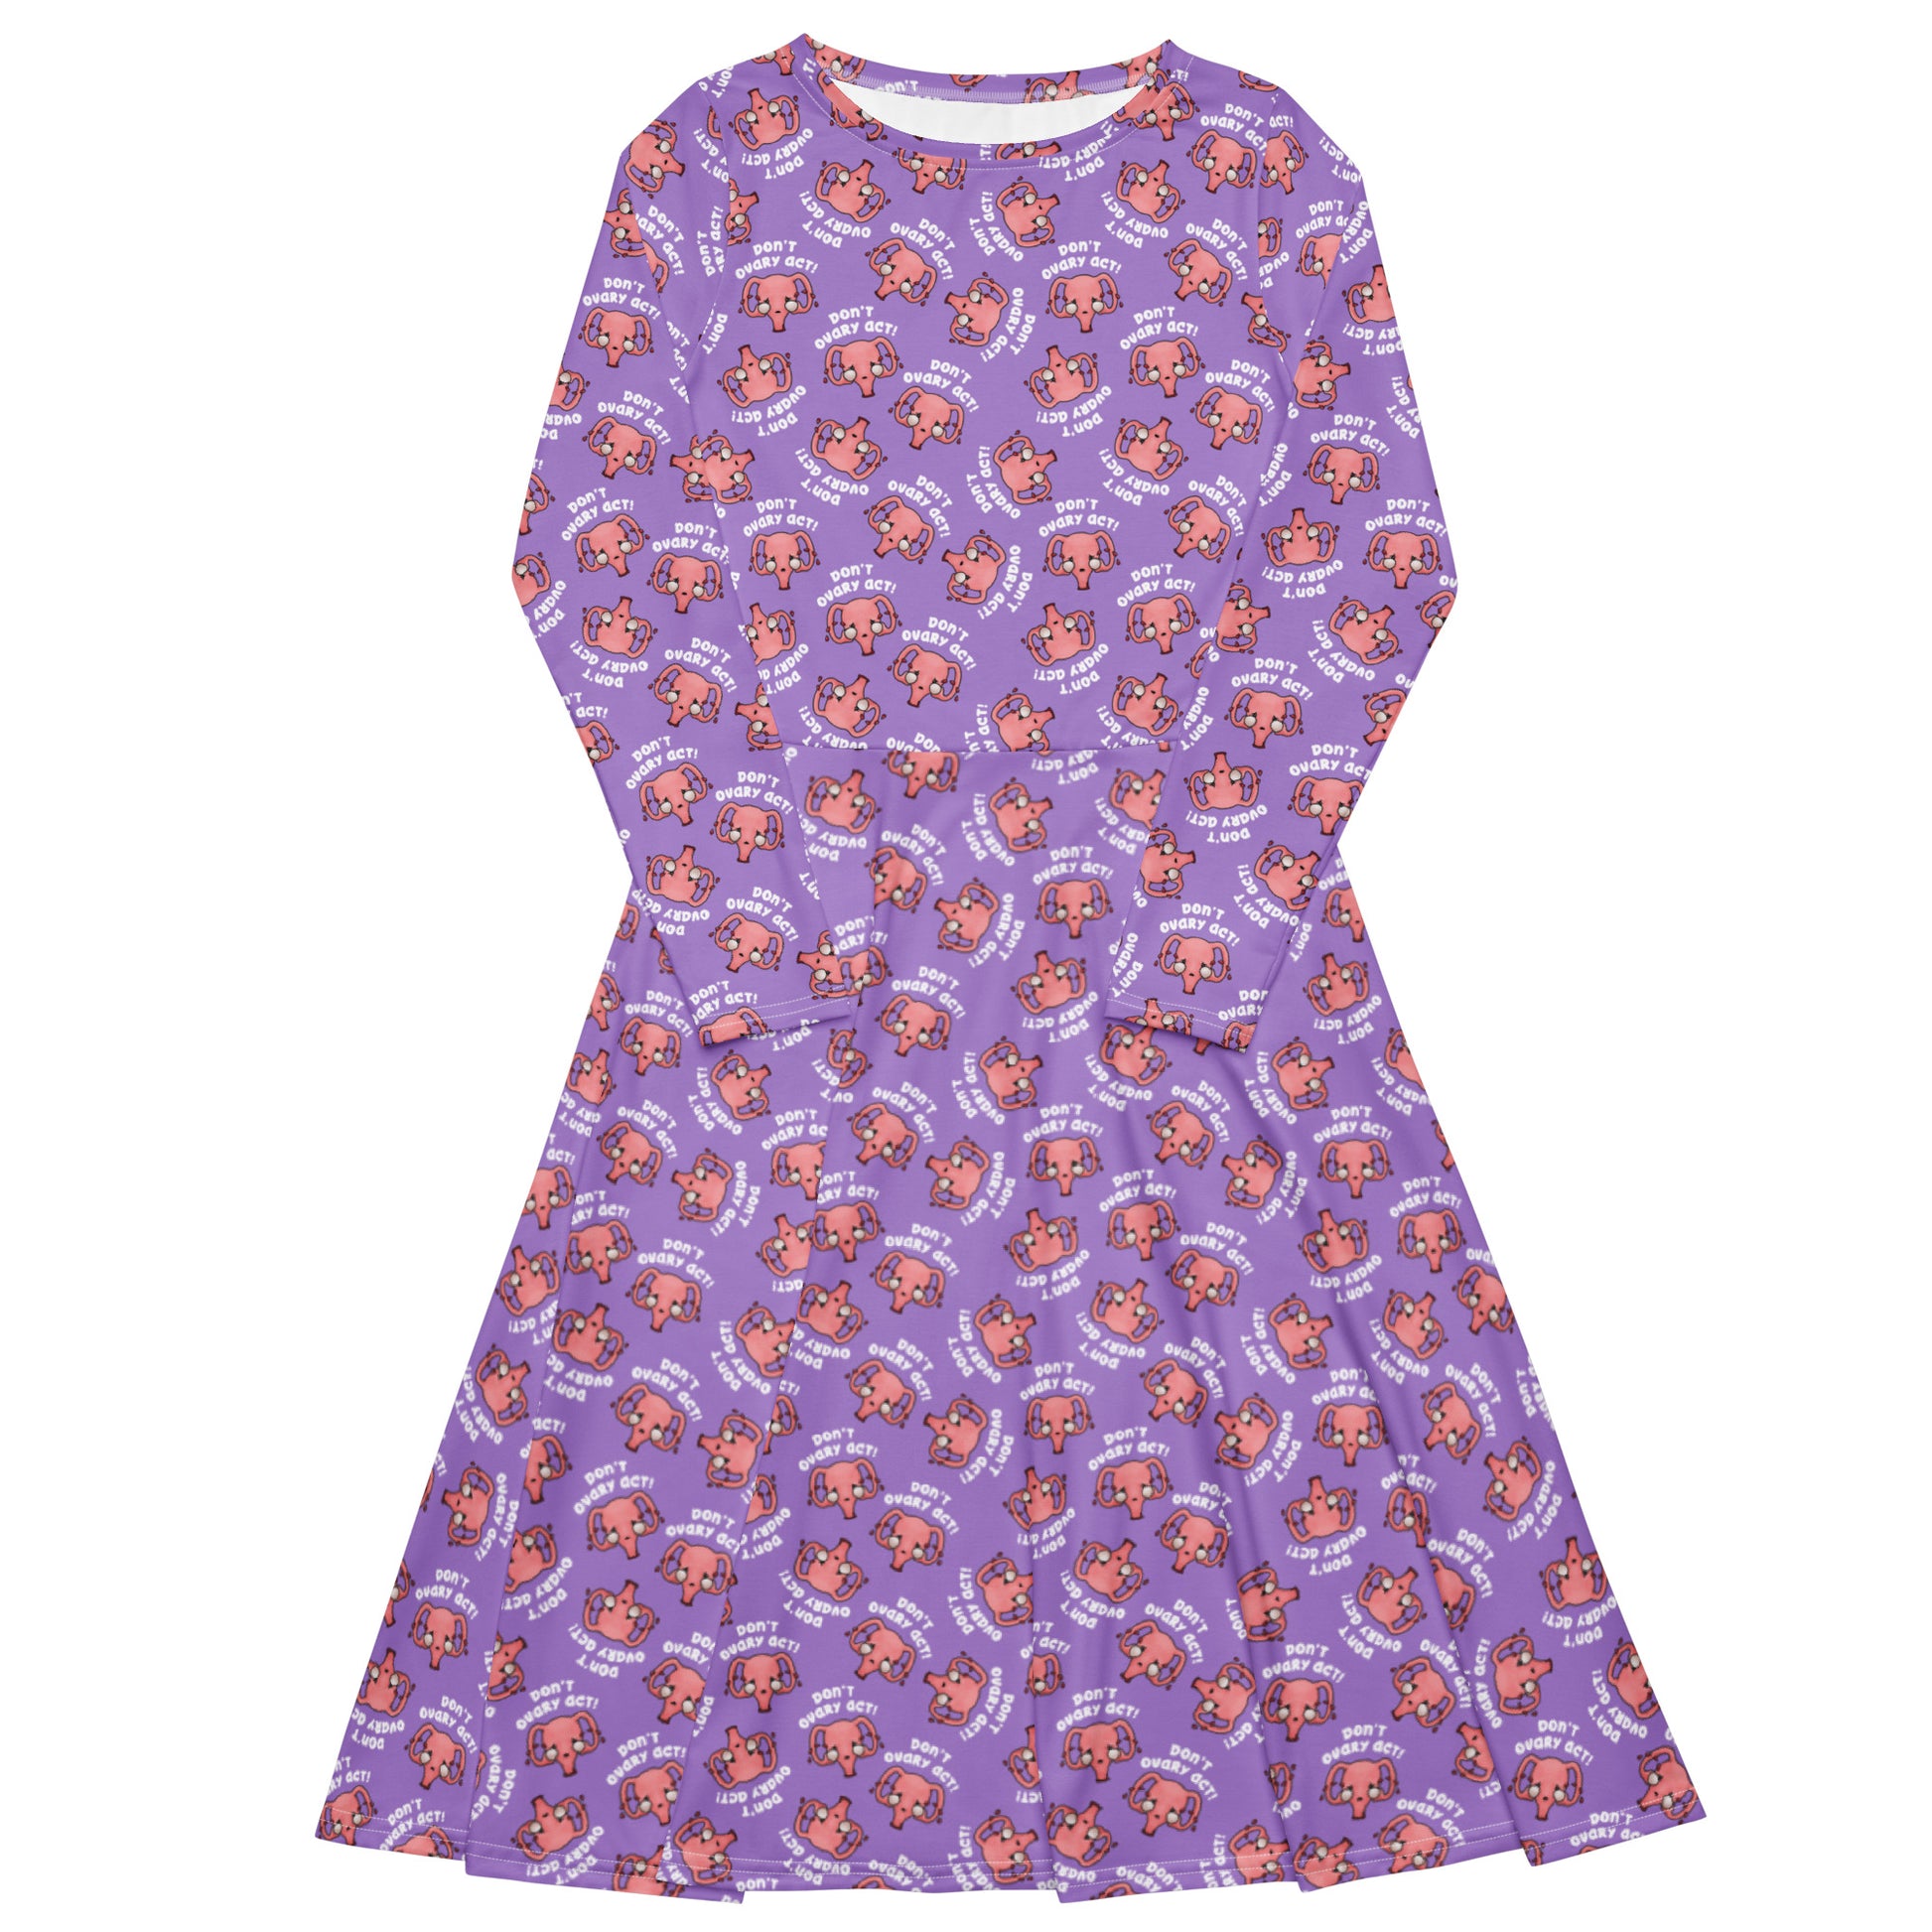 Flat view of Don't Ovary Act dress in purple, not being worn